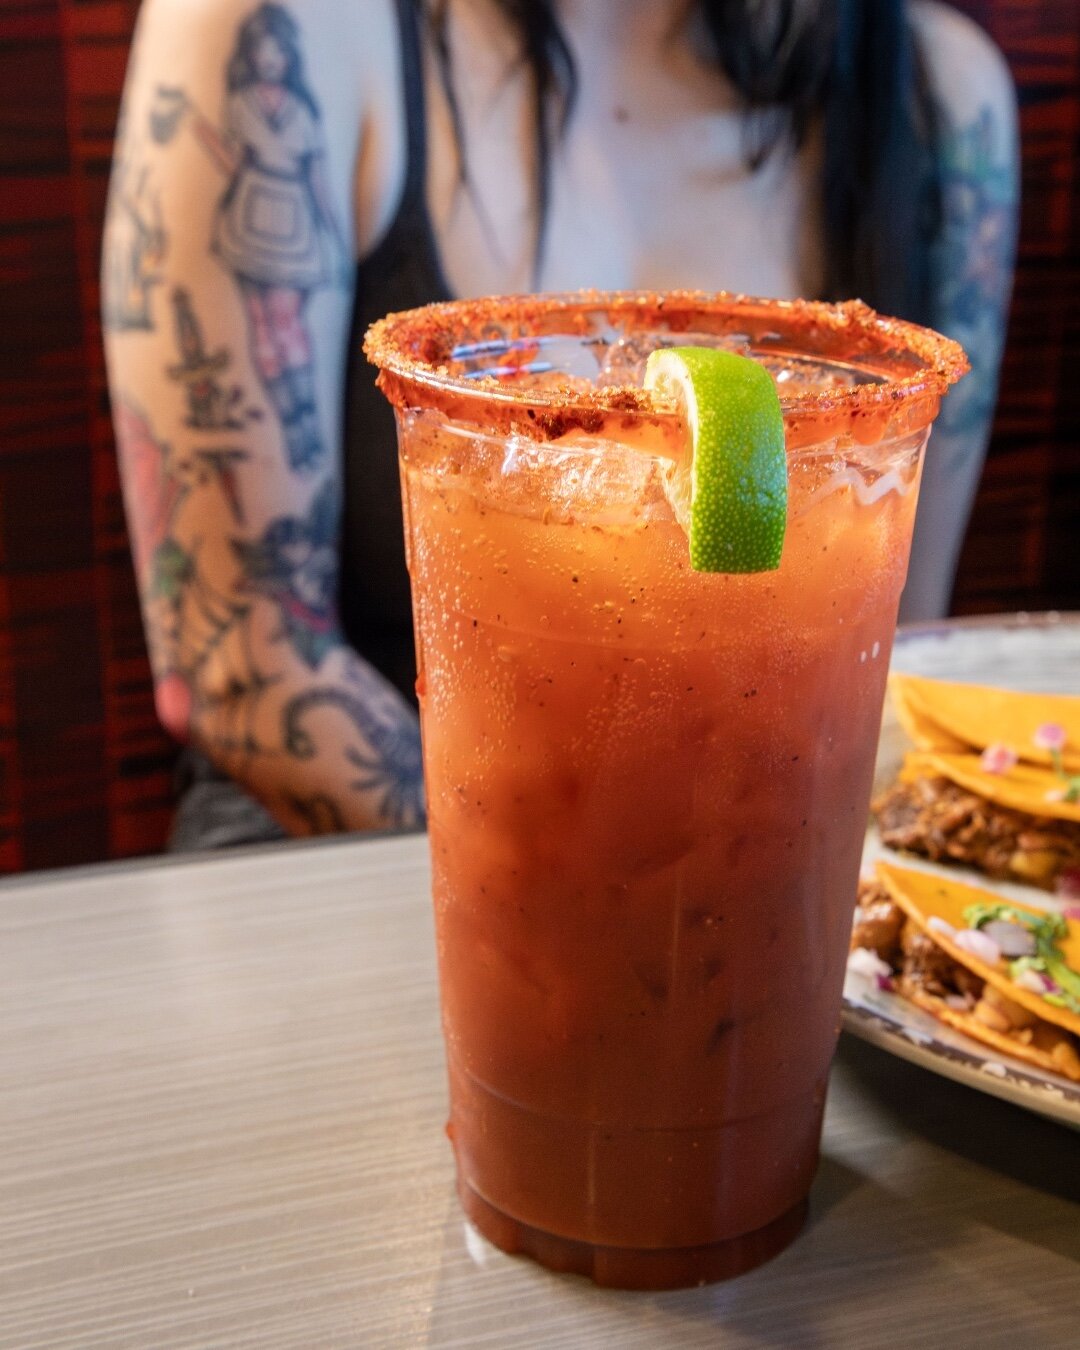 A michelada will always get you right and hit the spot! 😎

#chingontaqueria #bechingon #lelandnc #wilmingtonnc #taqueria #mexicanfood #comidamexicana #lelandfood #wilmingtonfoodie